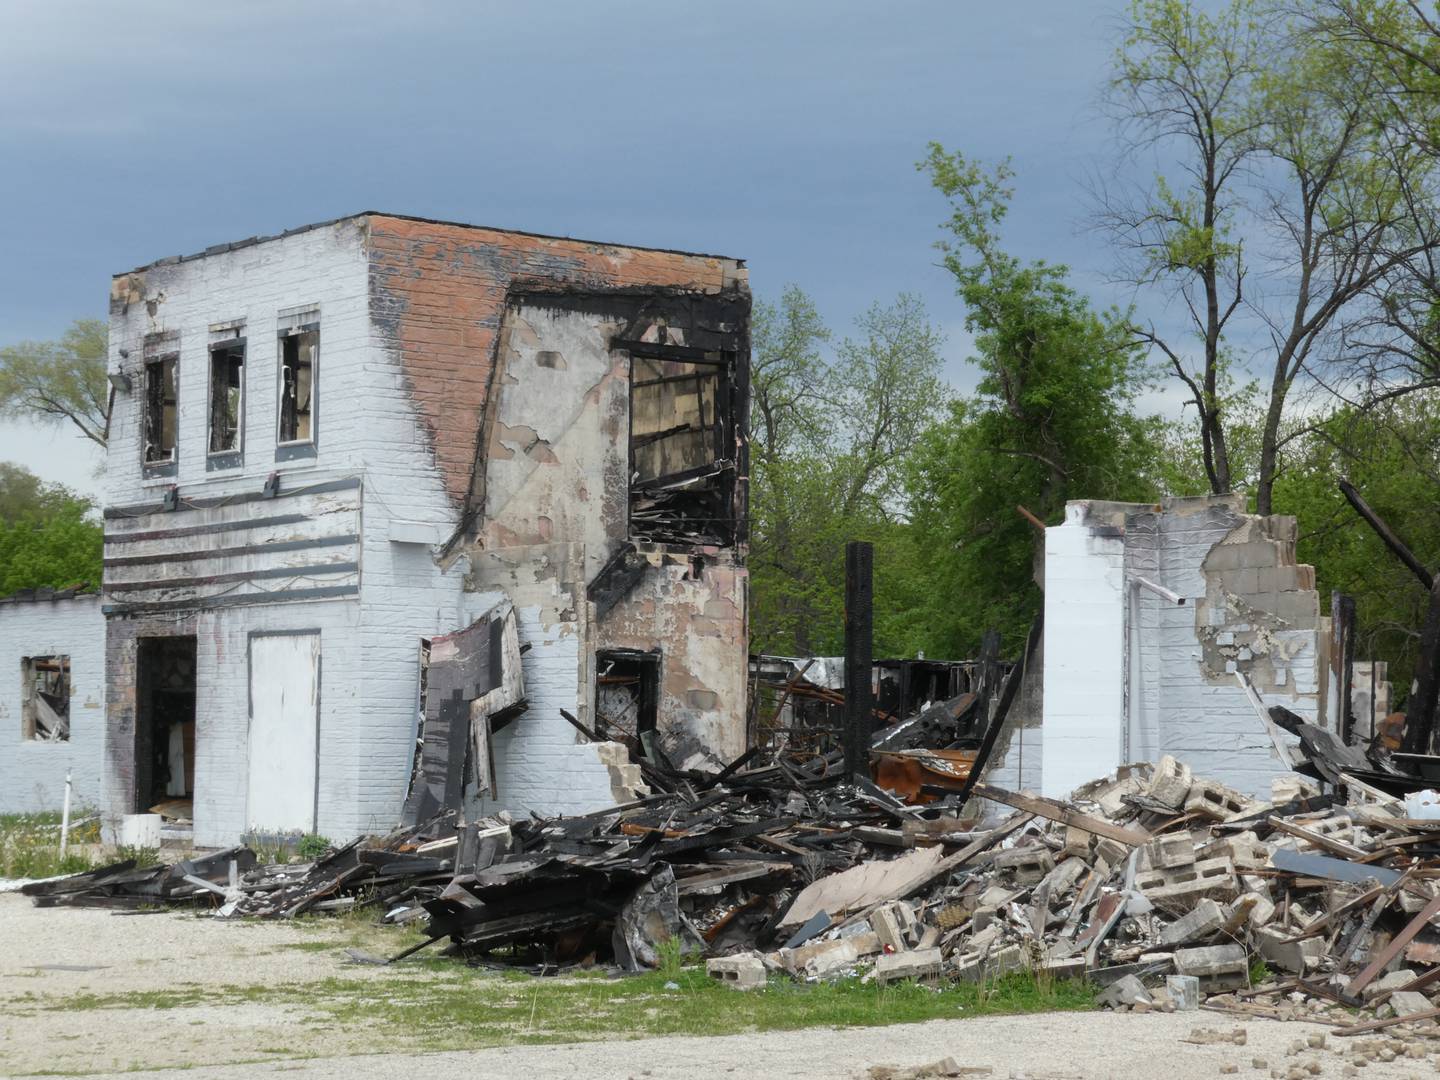 The remains of the former Just For Fun Roller Rink in McHenry, which burned down just under a year ago, were approved for demolition on Monday, May 16, 2022, by the McHenry City Council. The Mayor is hoping the city can fast-track plans for a commercial development once the property is cleared.